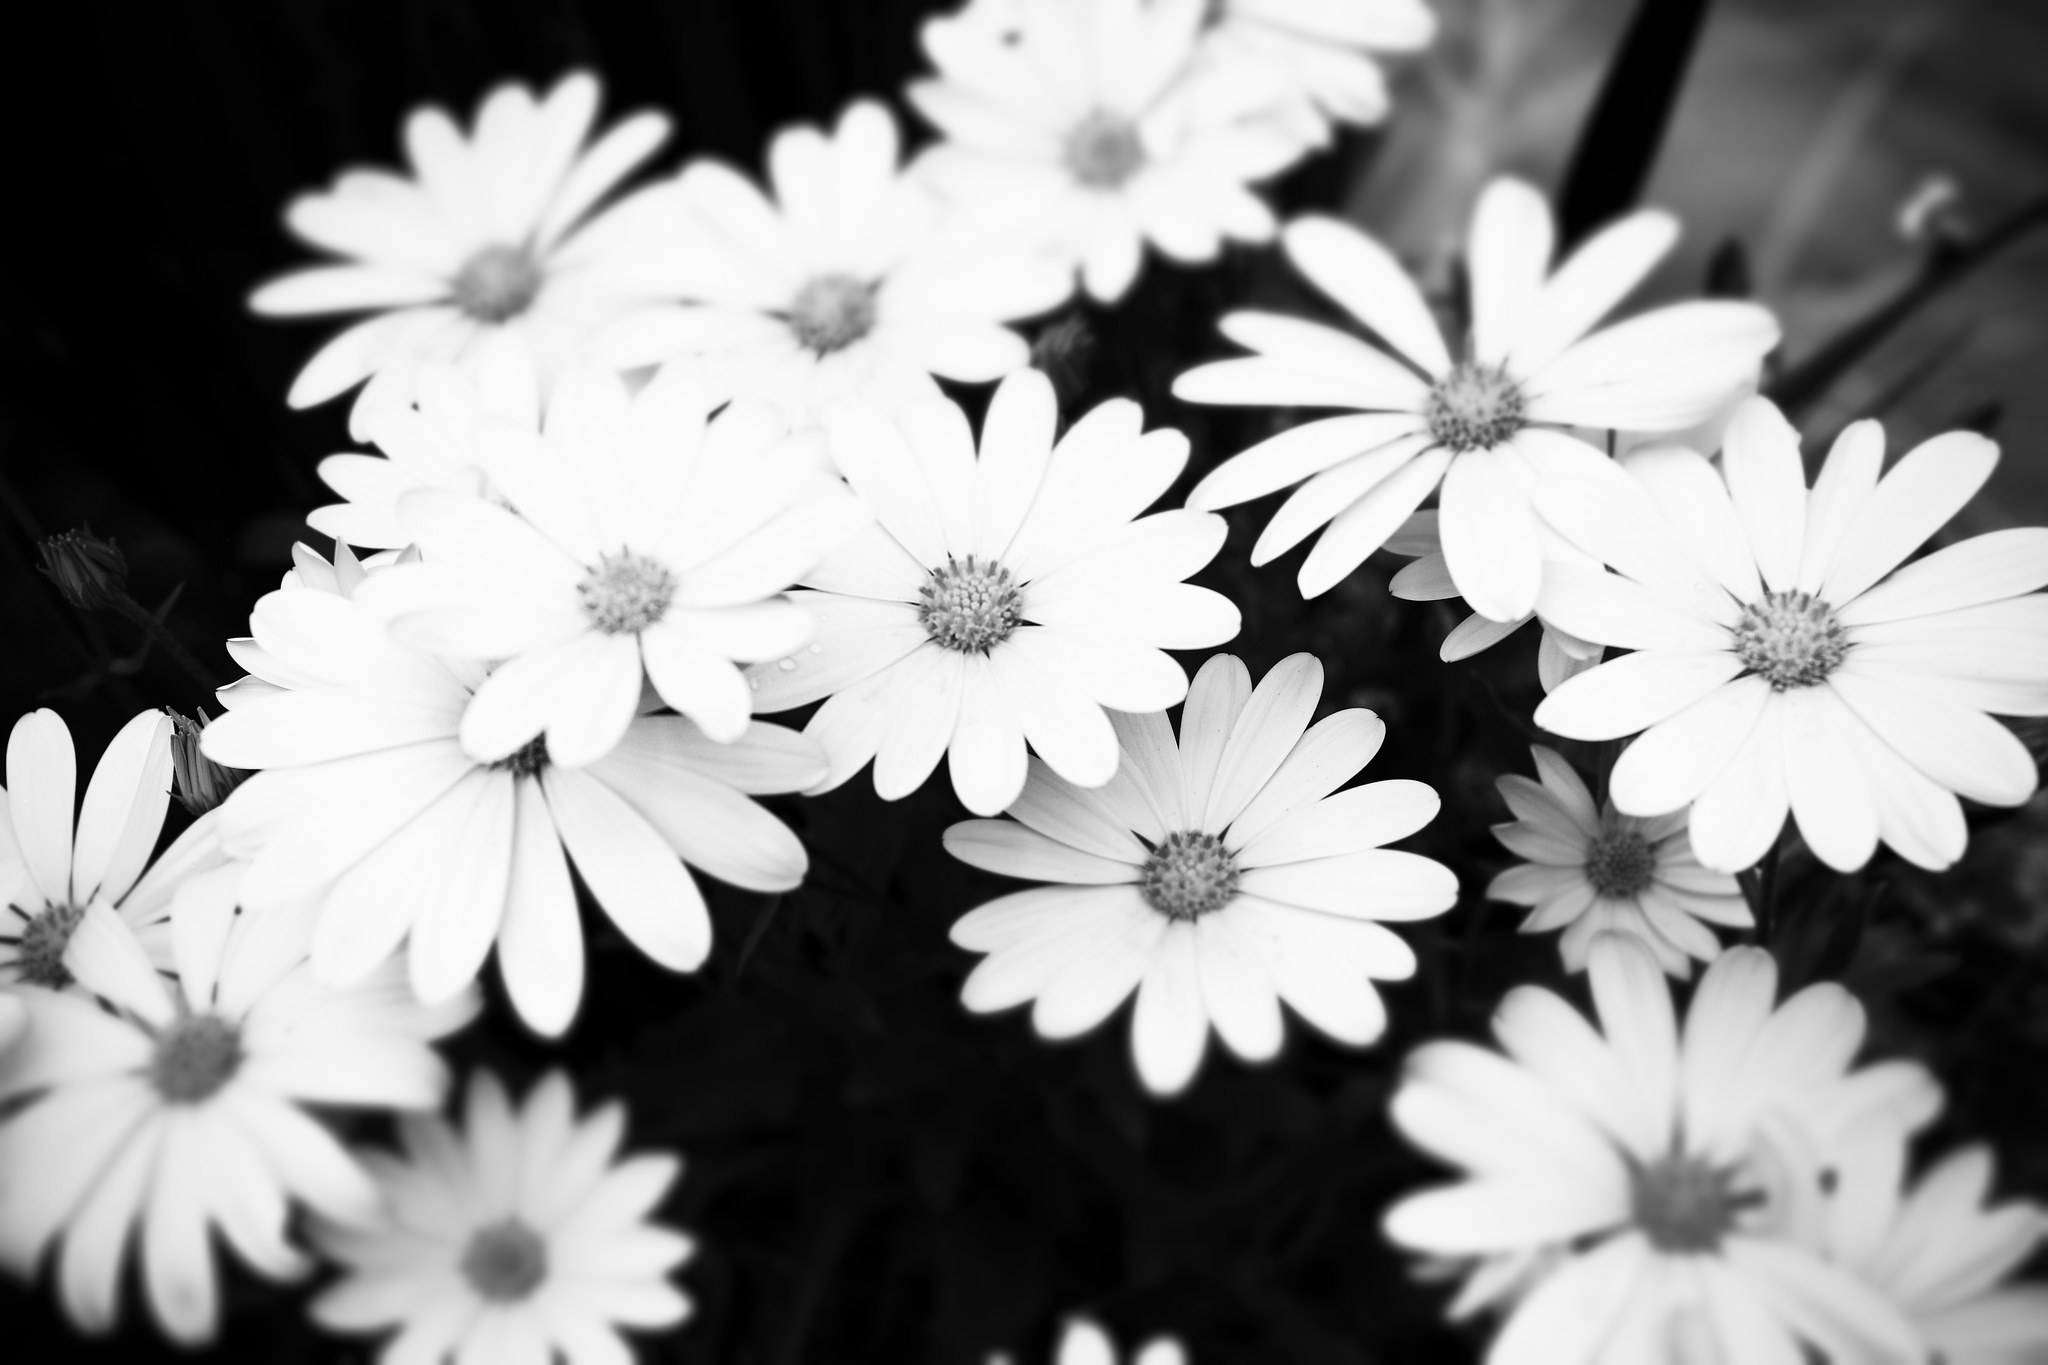 Black & White Floral Wallpapers | Floral Patterns | FreeCreatives